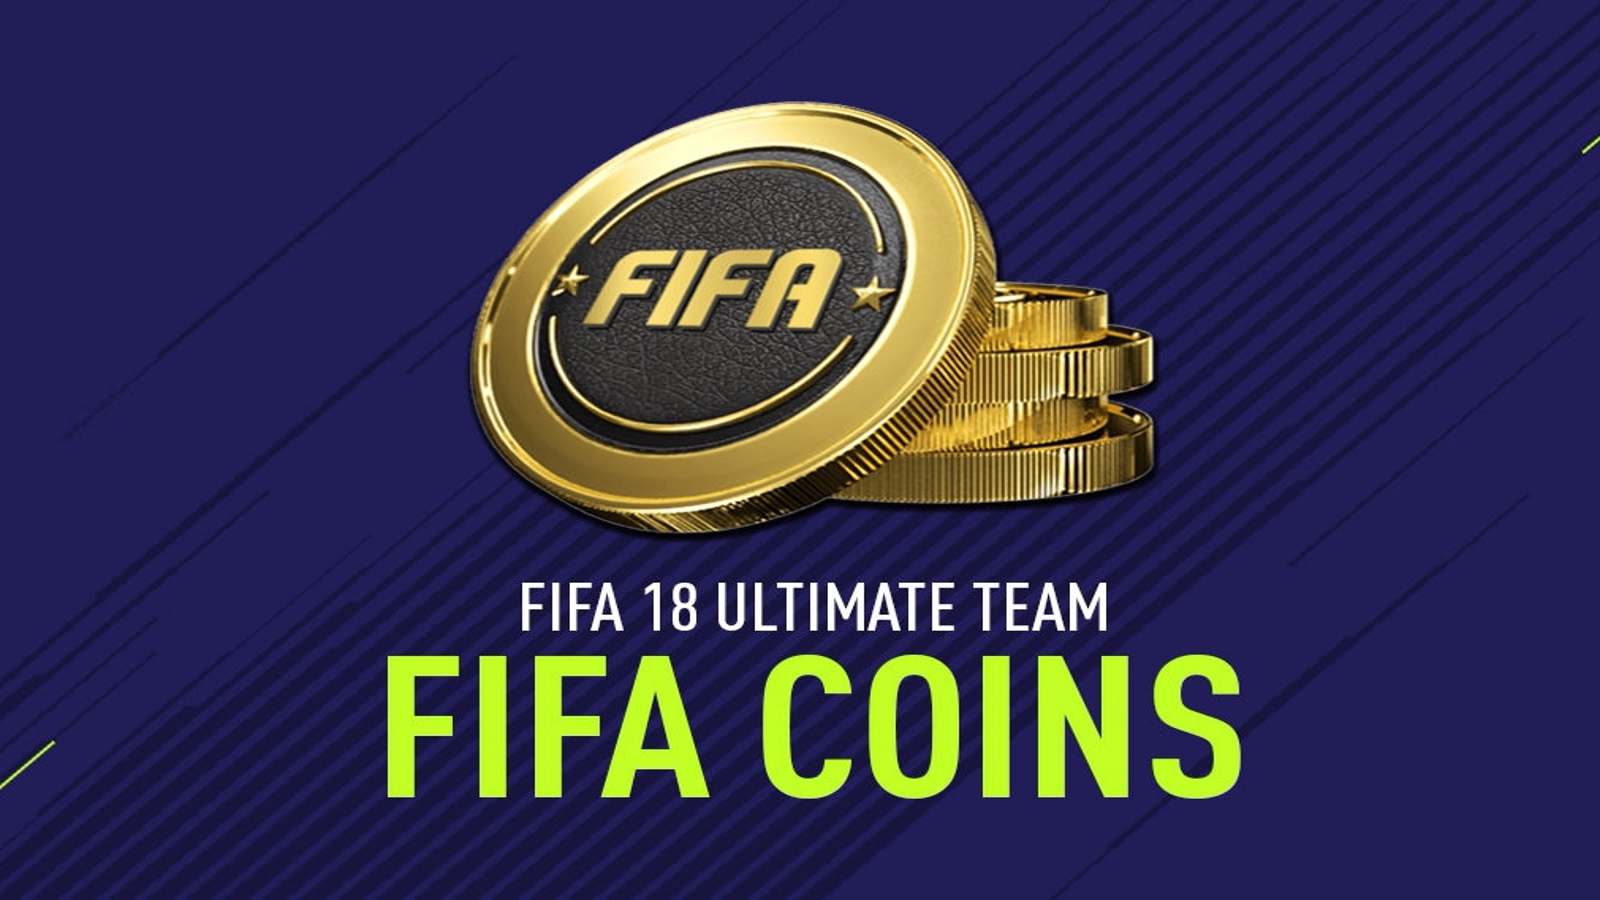 FIFA 18 coins - how to earn FIFA coins quickly and get FIFA free in Ultimate Team | Eurogamer.net